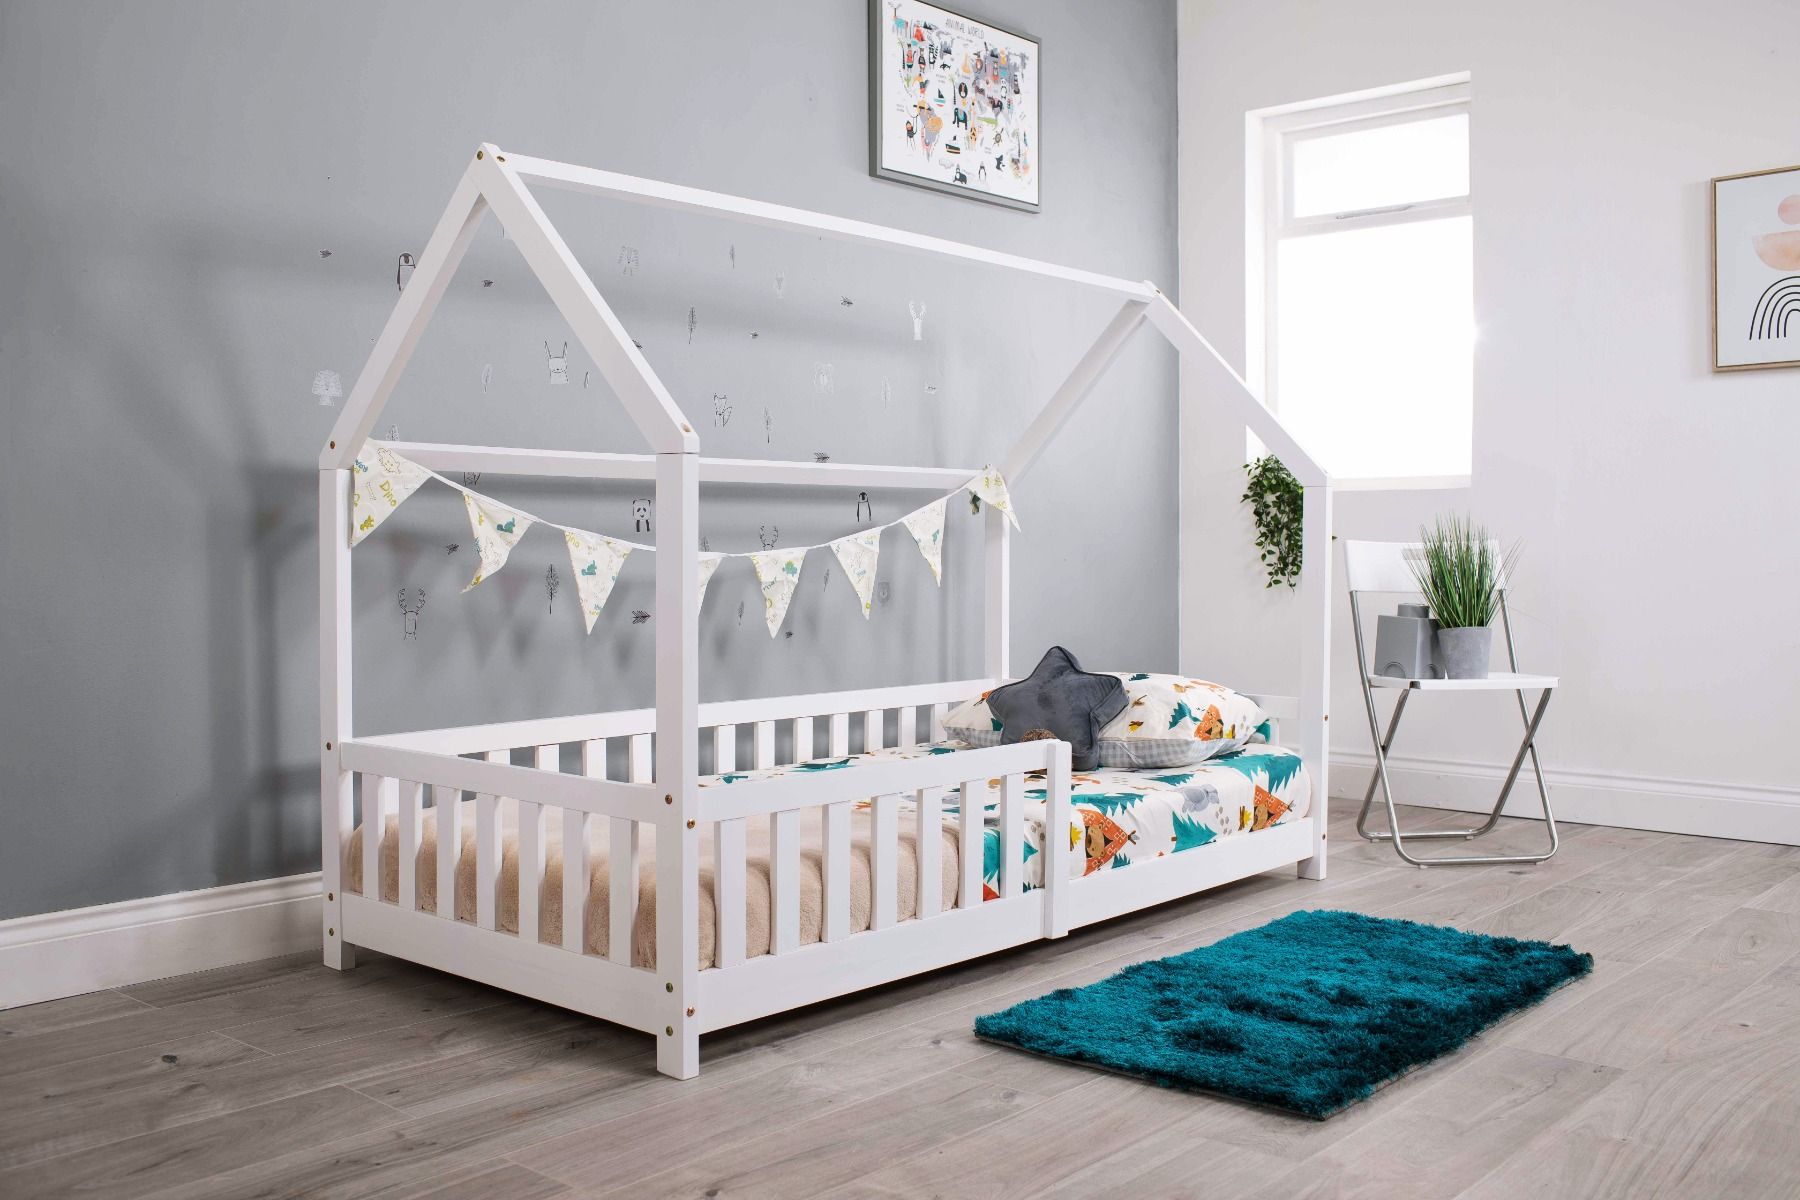 Flair Explorer Playhouse Single Bed with Rails - White